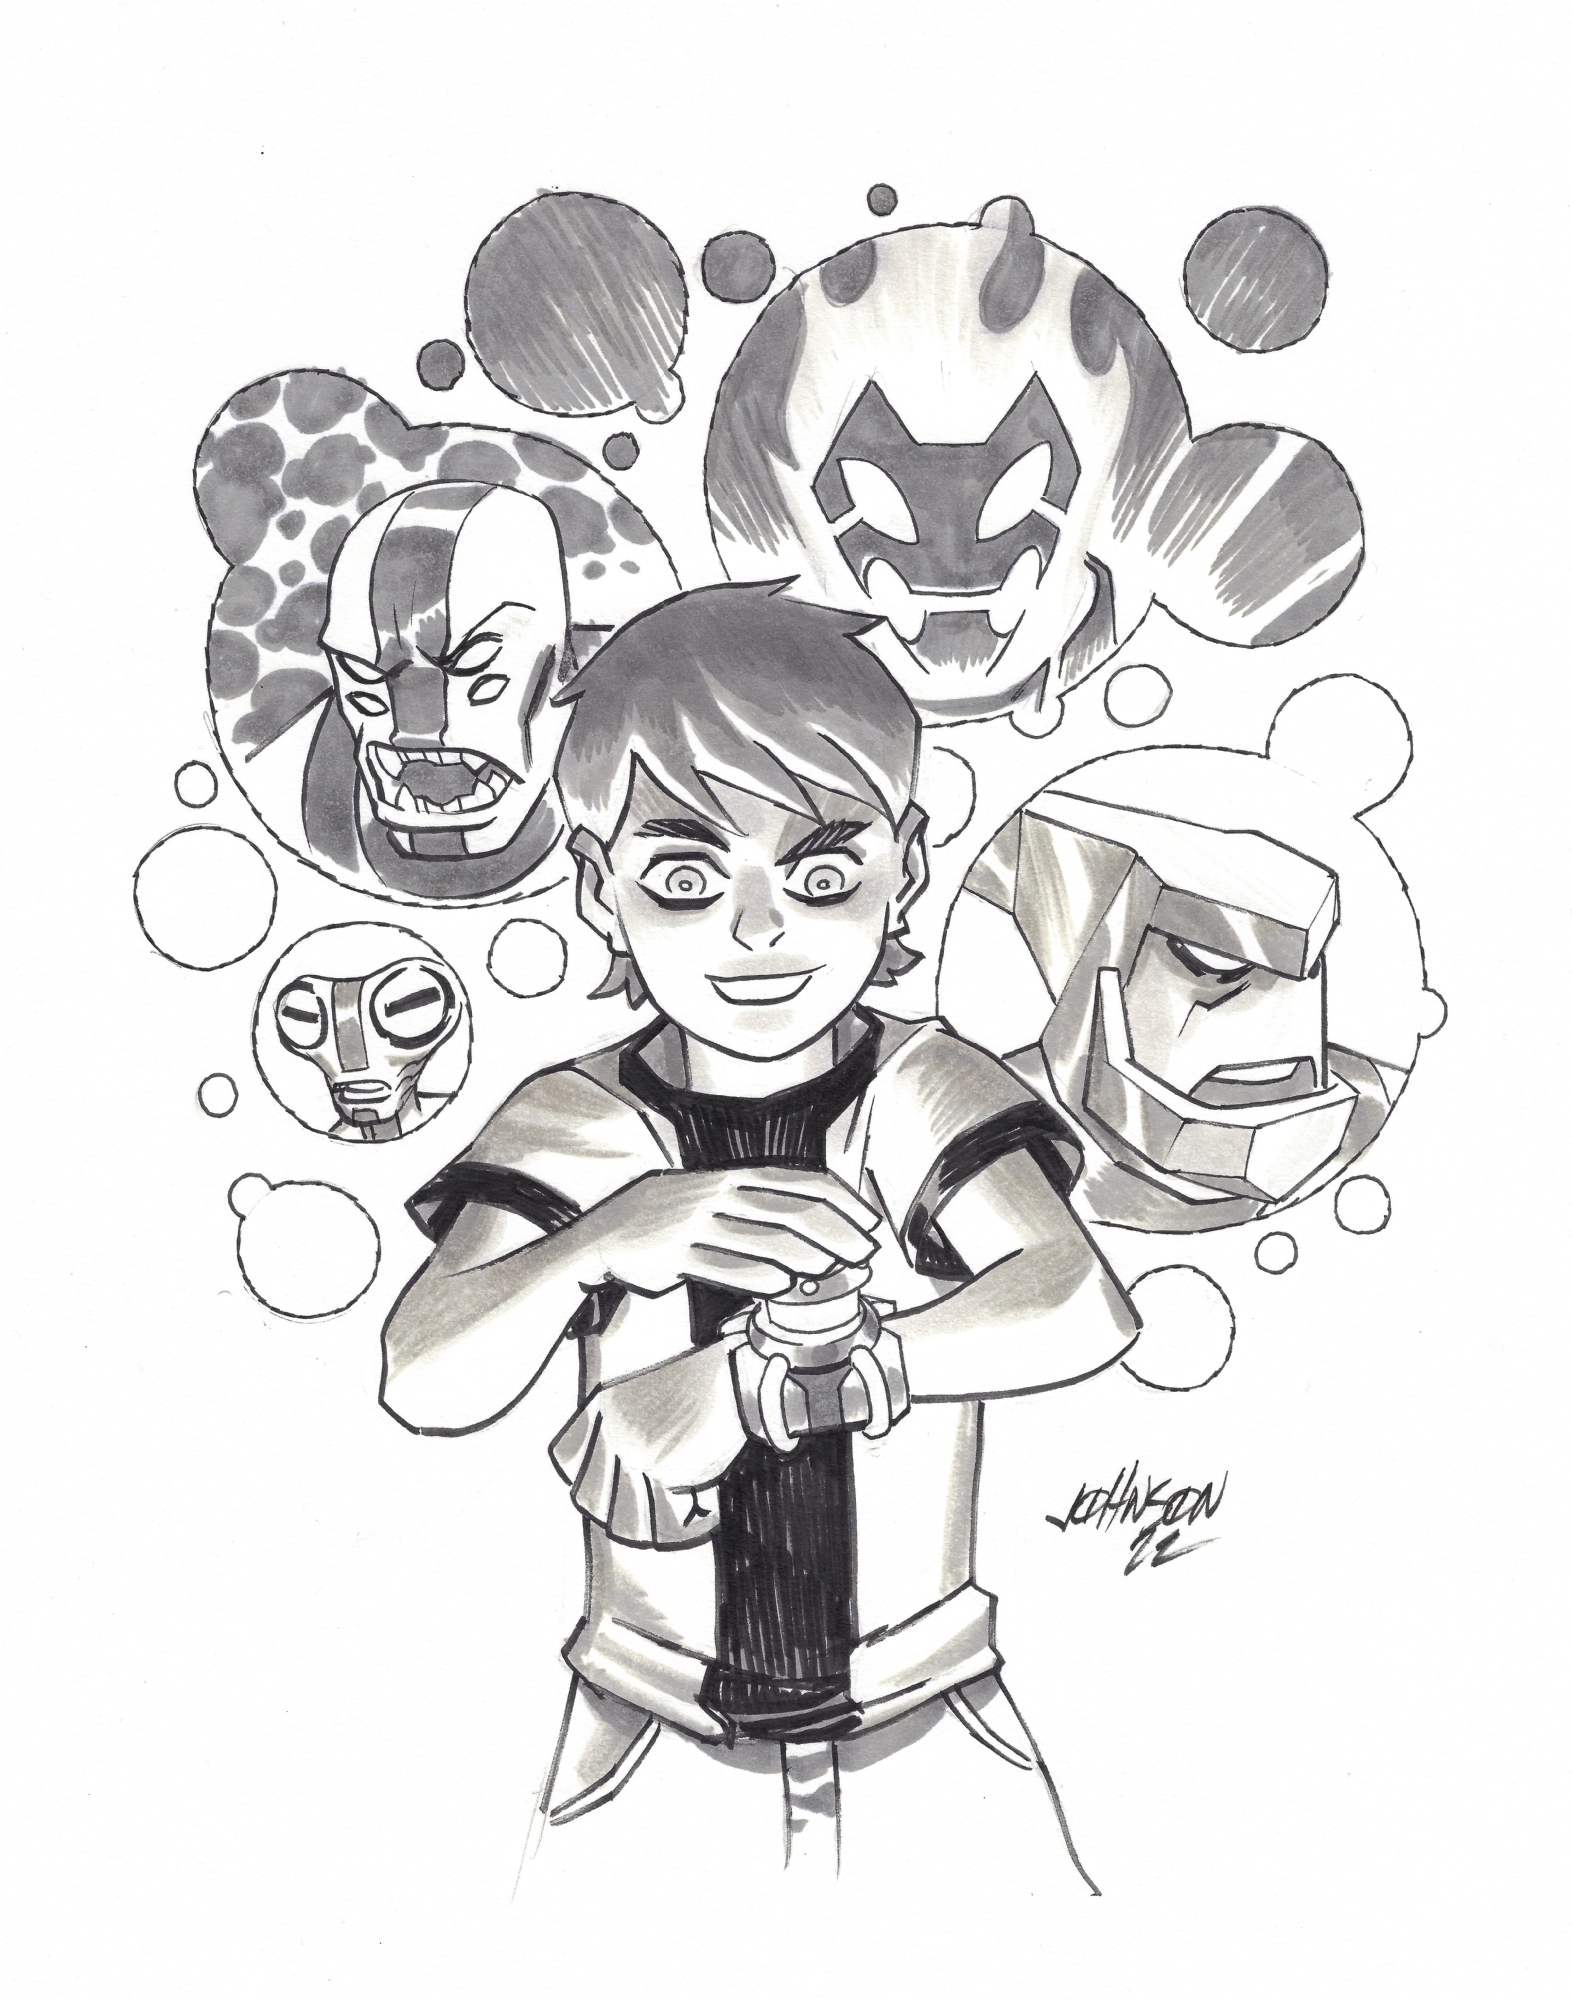 Ben 10 coloring pages to print - Ben 10 Kids Coloring Pages